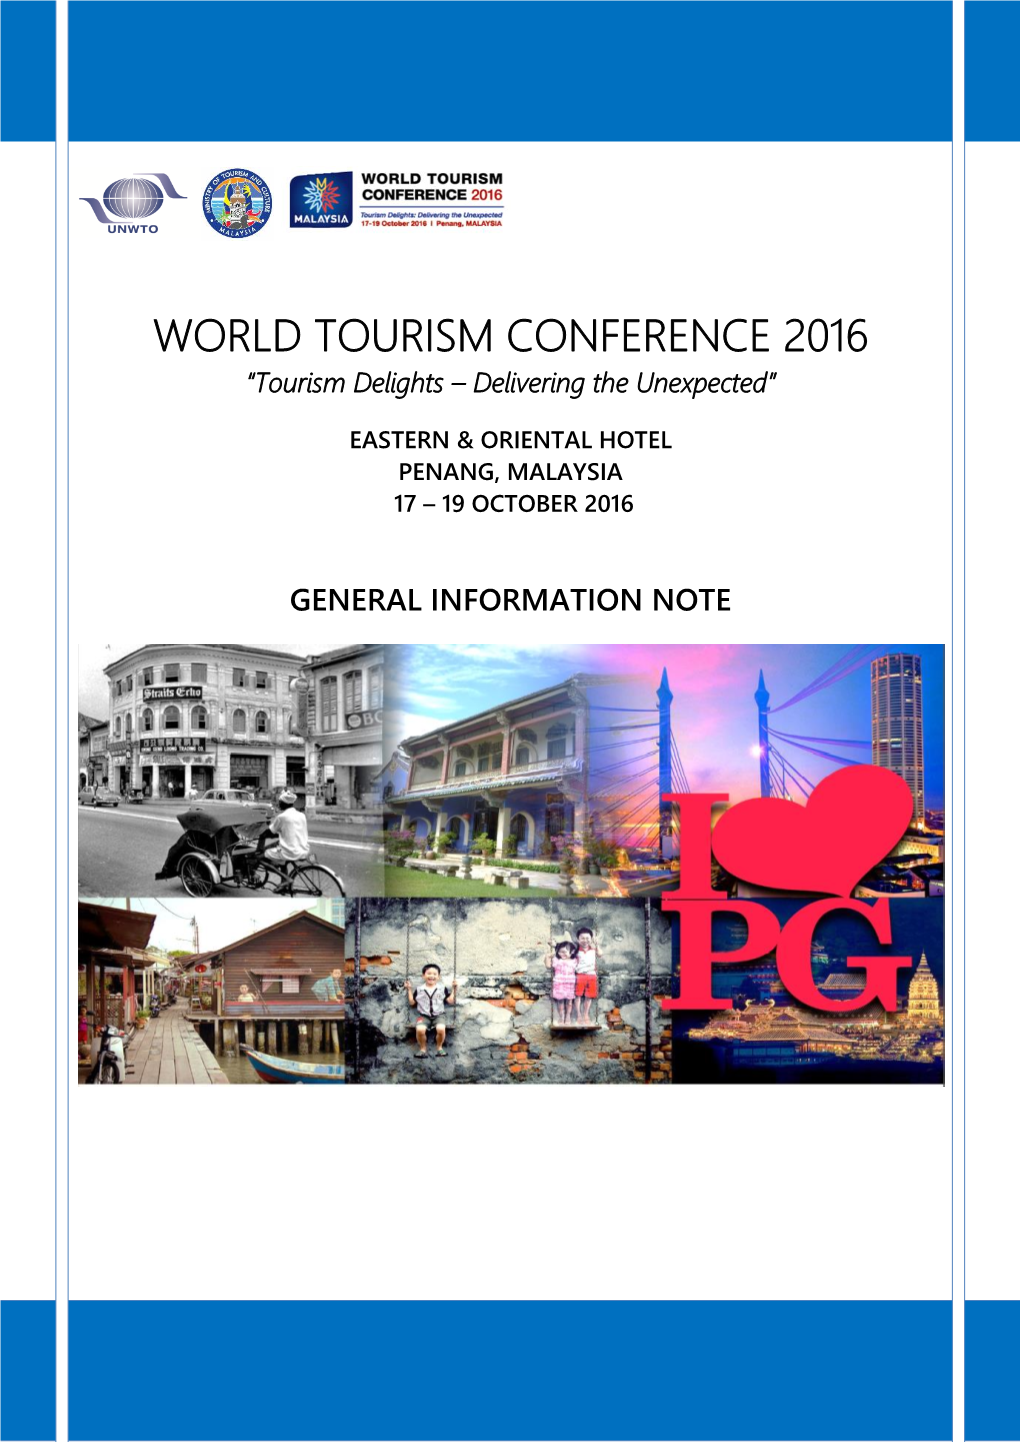 WORLD TOURISM CONFERENCE 2016 “Tourism Delights – Delivering the Unexpected”